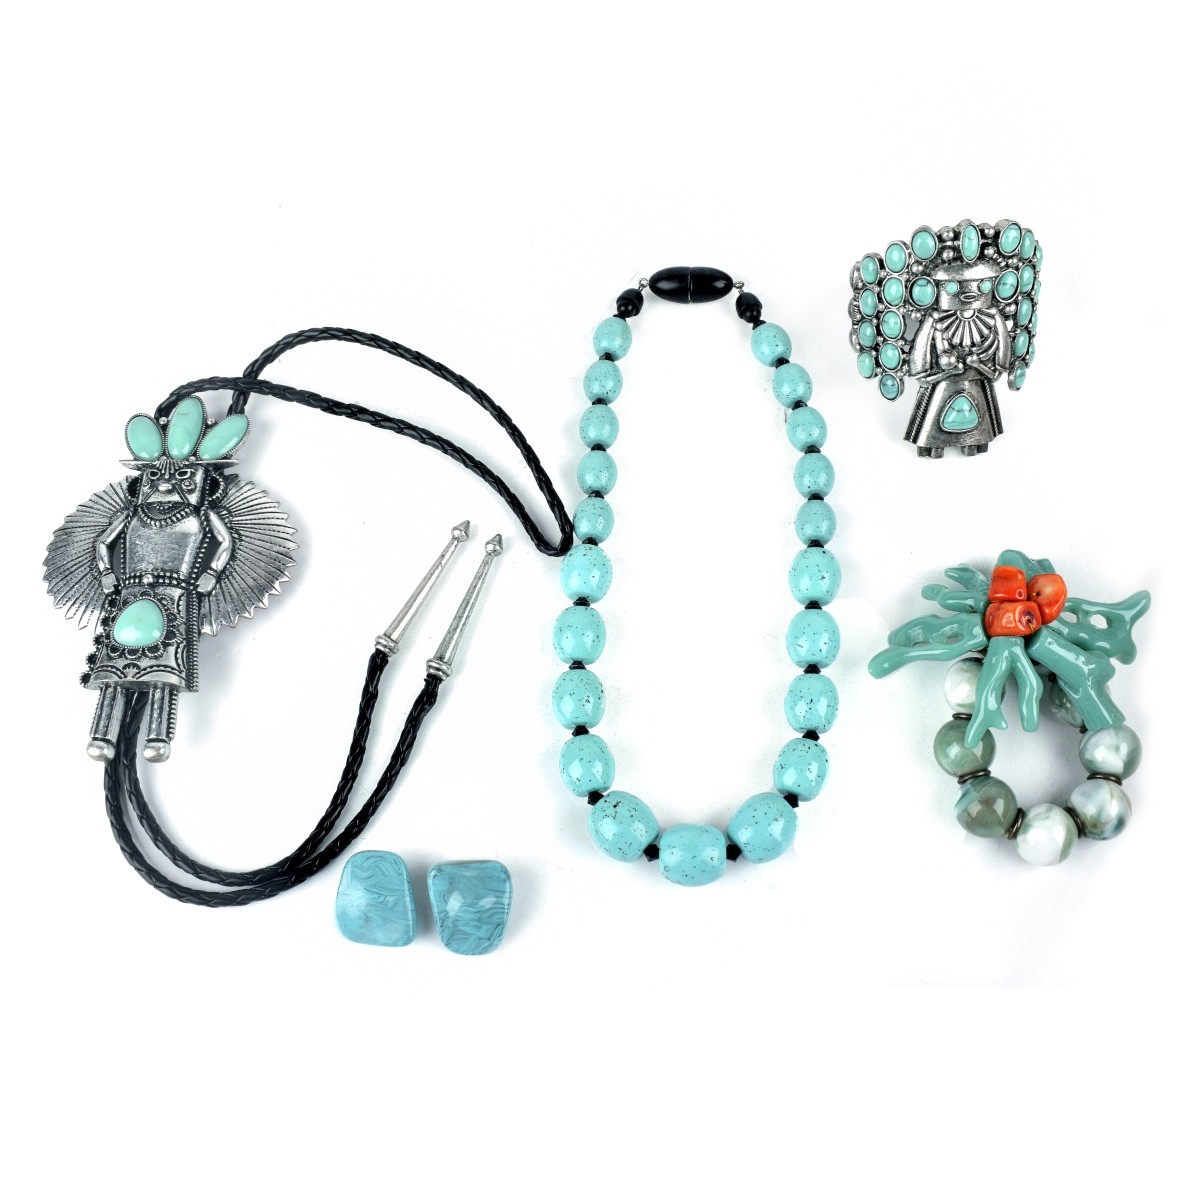 Imitation Turquoise Jewelry Collection